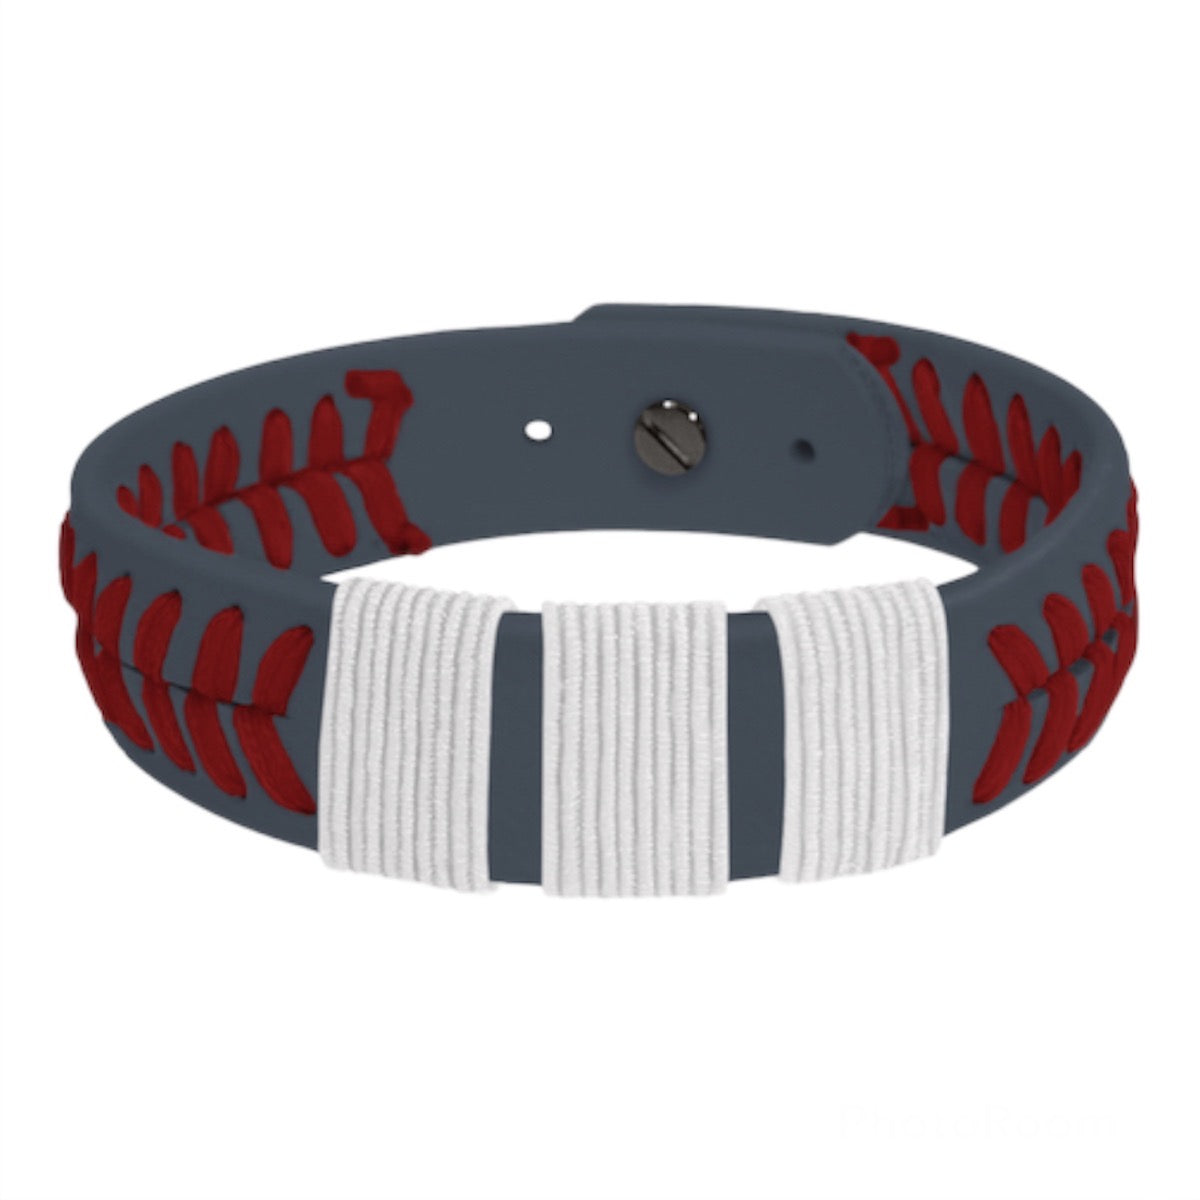 20 Pieces Baseball Bracelet Red Black Brown White Wristbands